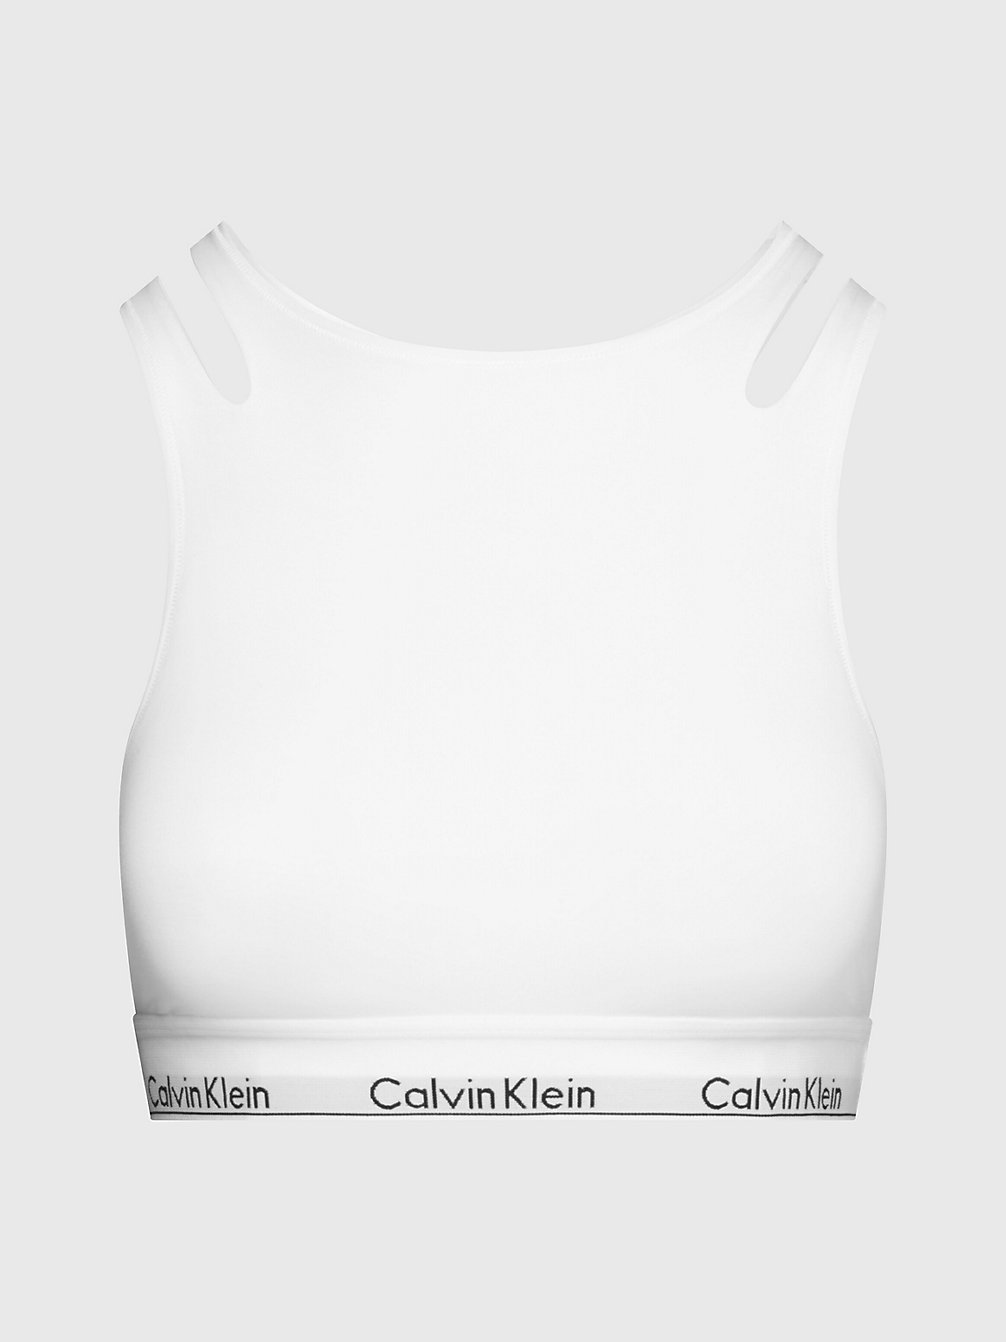 Corpiño - CK Deconstructed > WHITE > undefined mujer > Calvin Klein